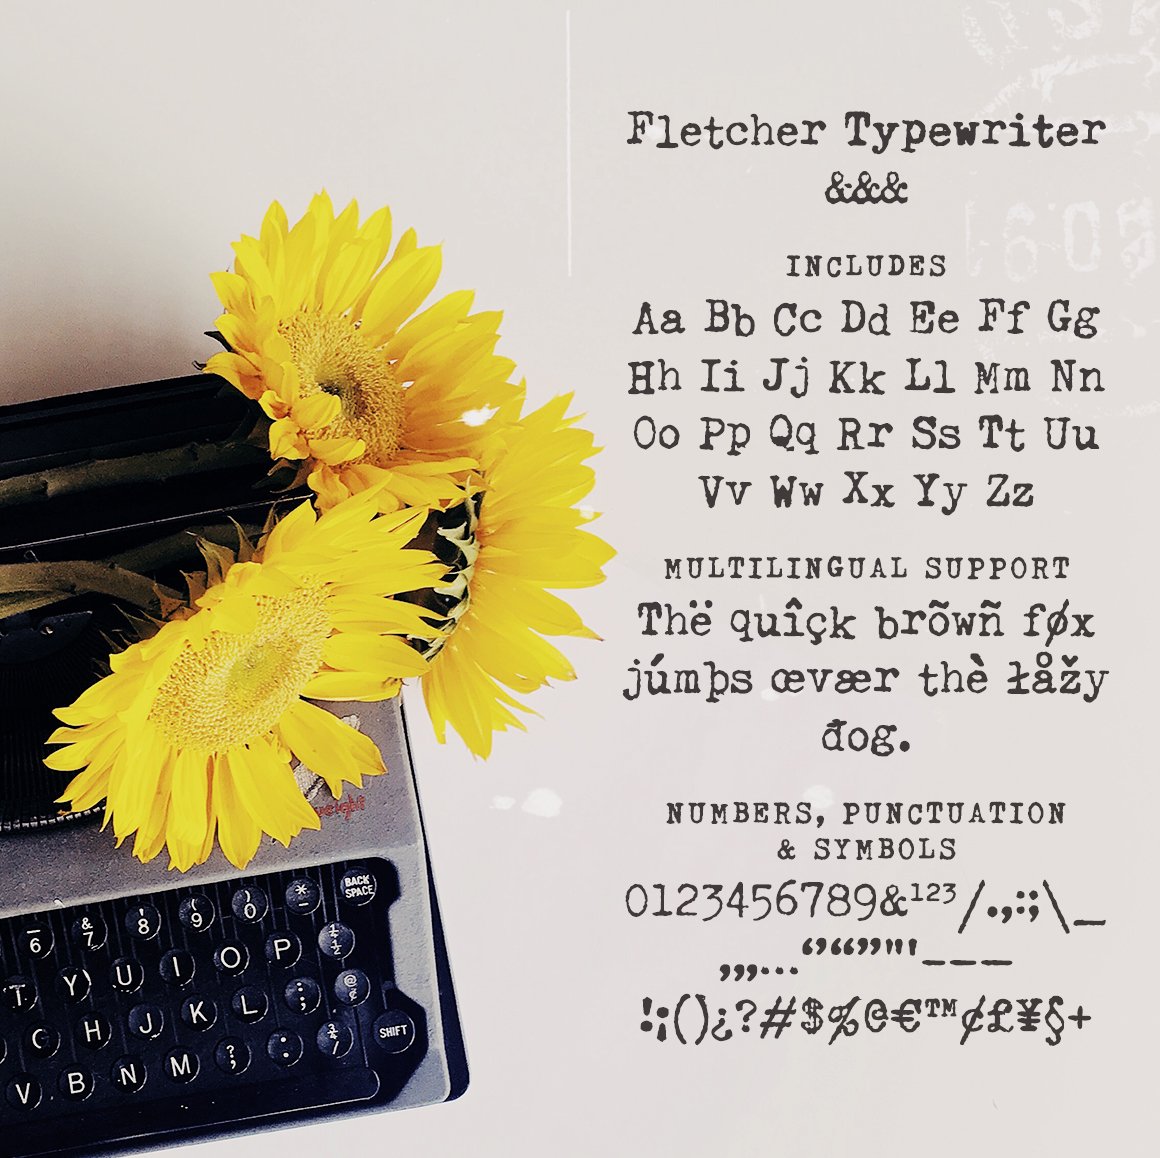 Fletcher Typewriter Font and Extras